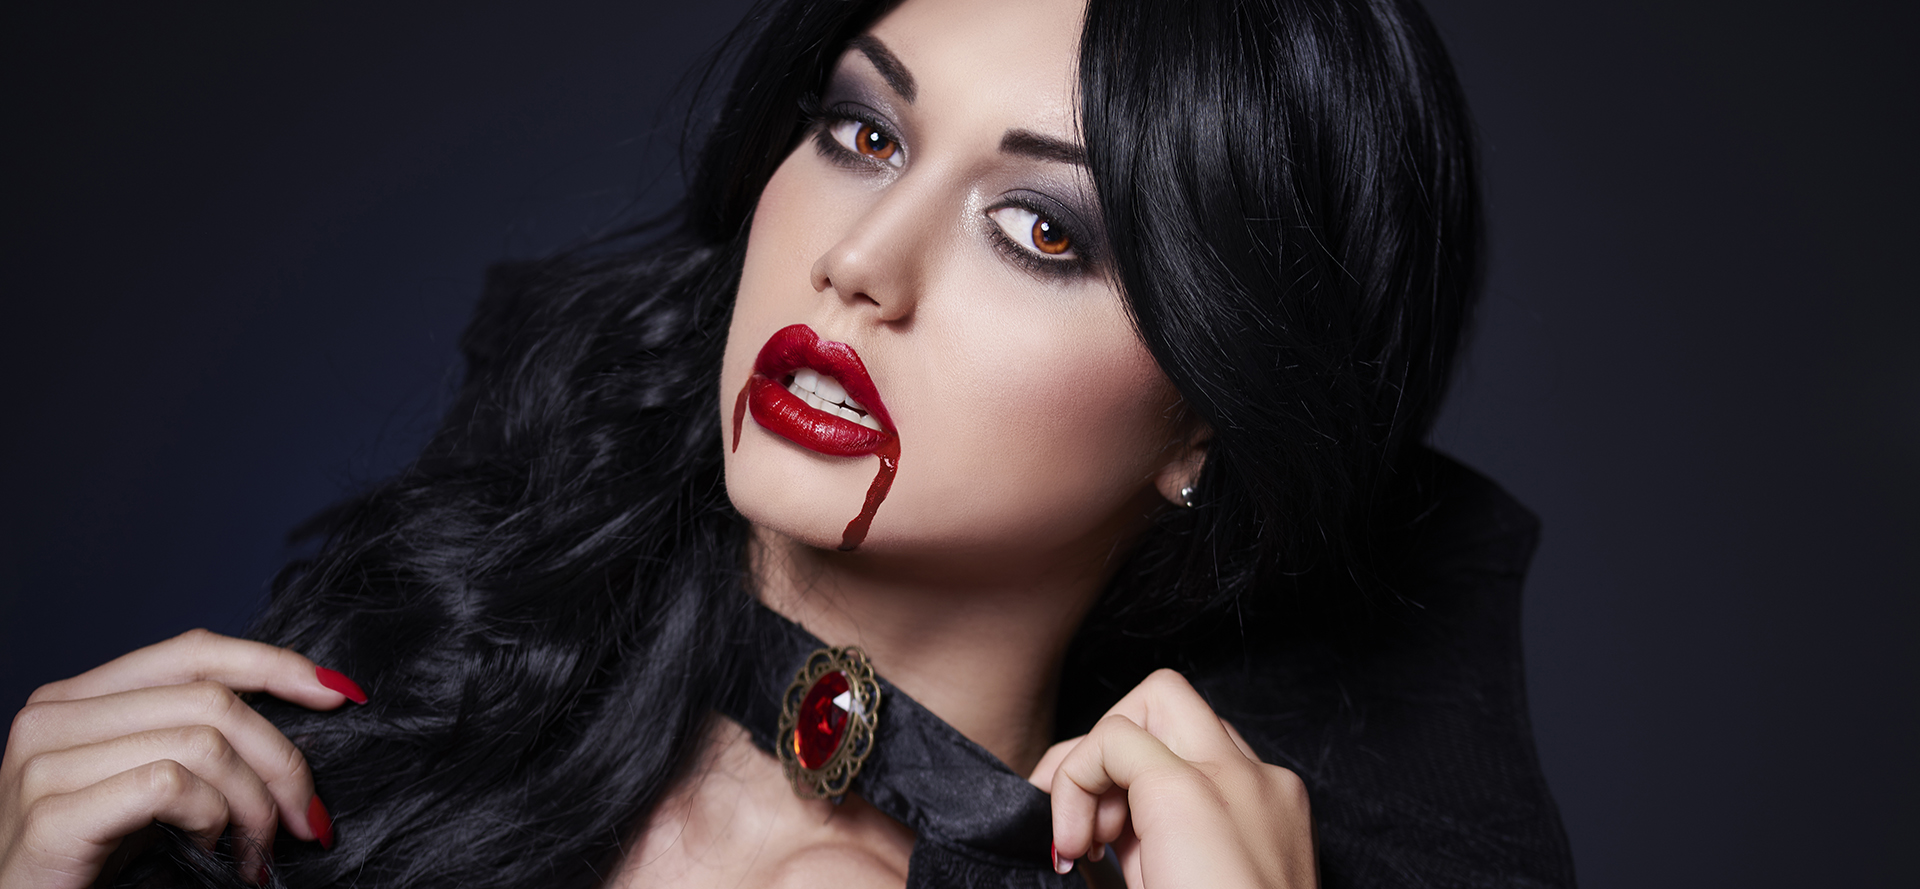 Dark hair vampire with blood on the face.